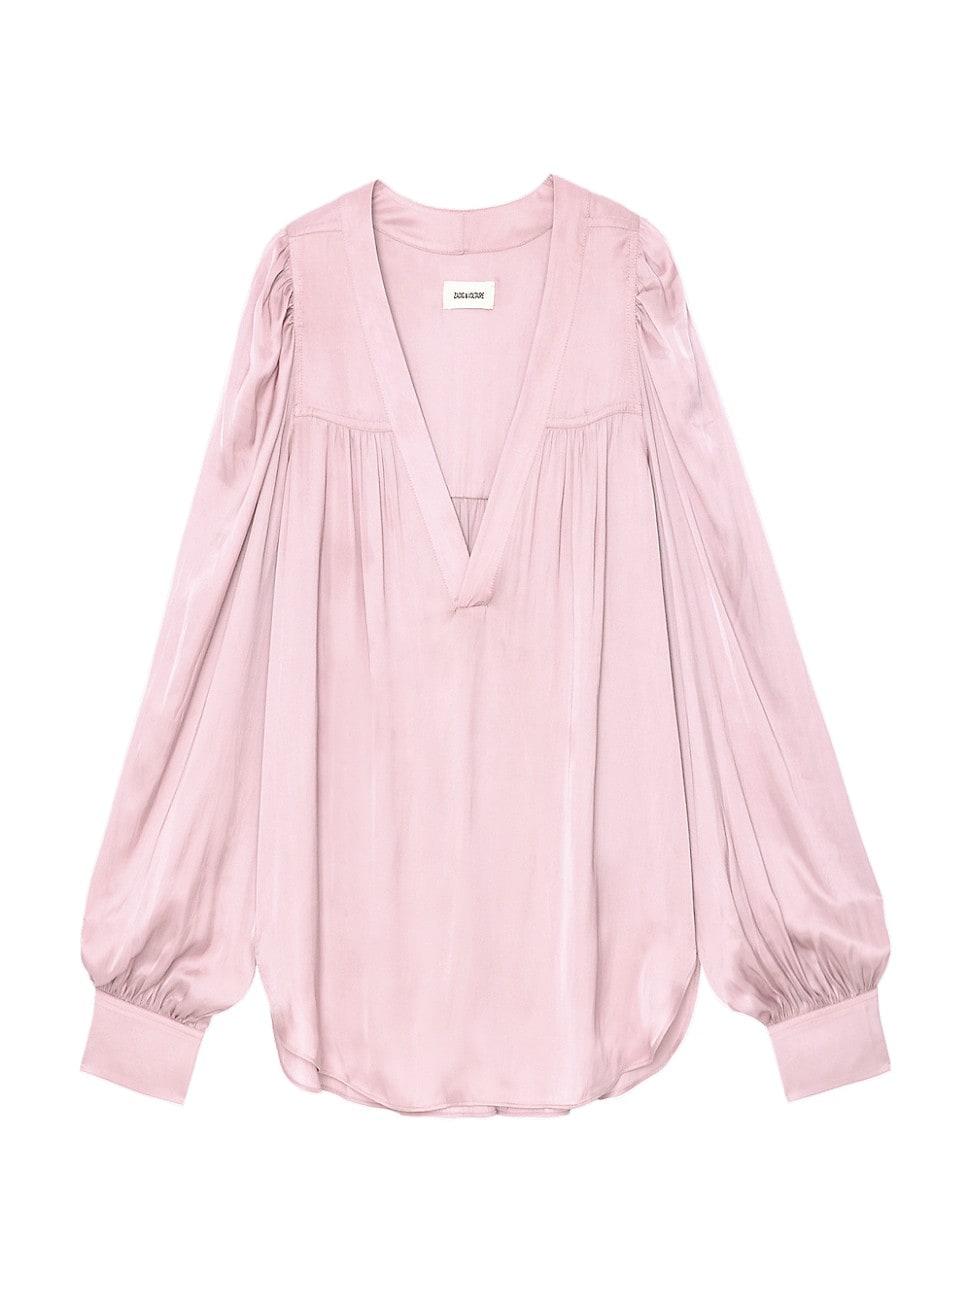 Zadig & Voltaire Telia Satin Blouse in Pink | Lyst